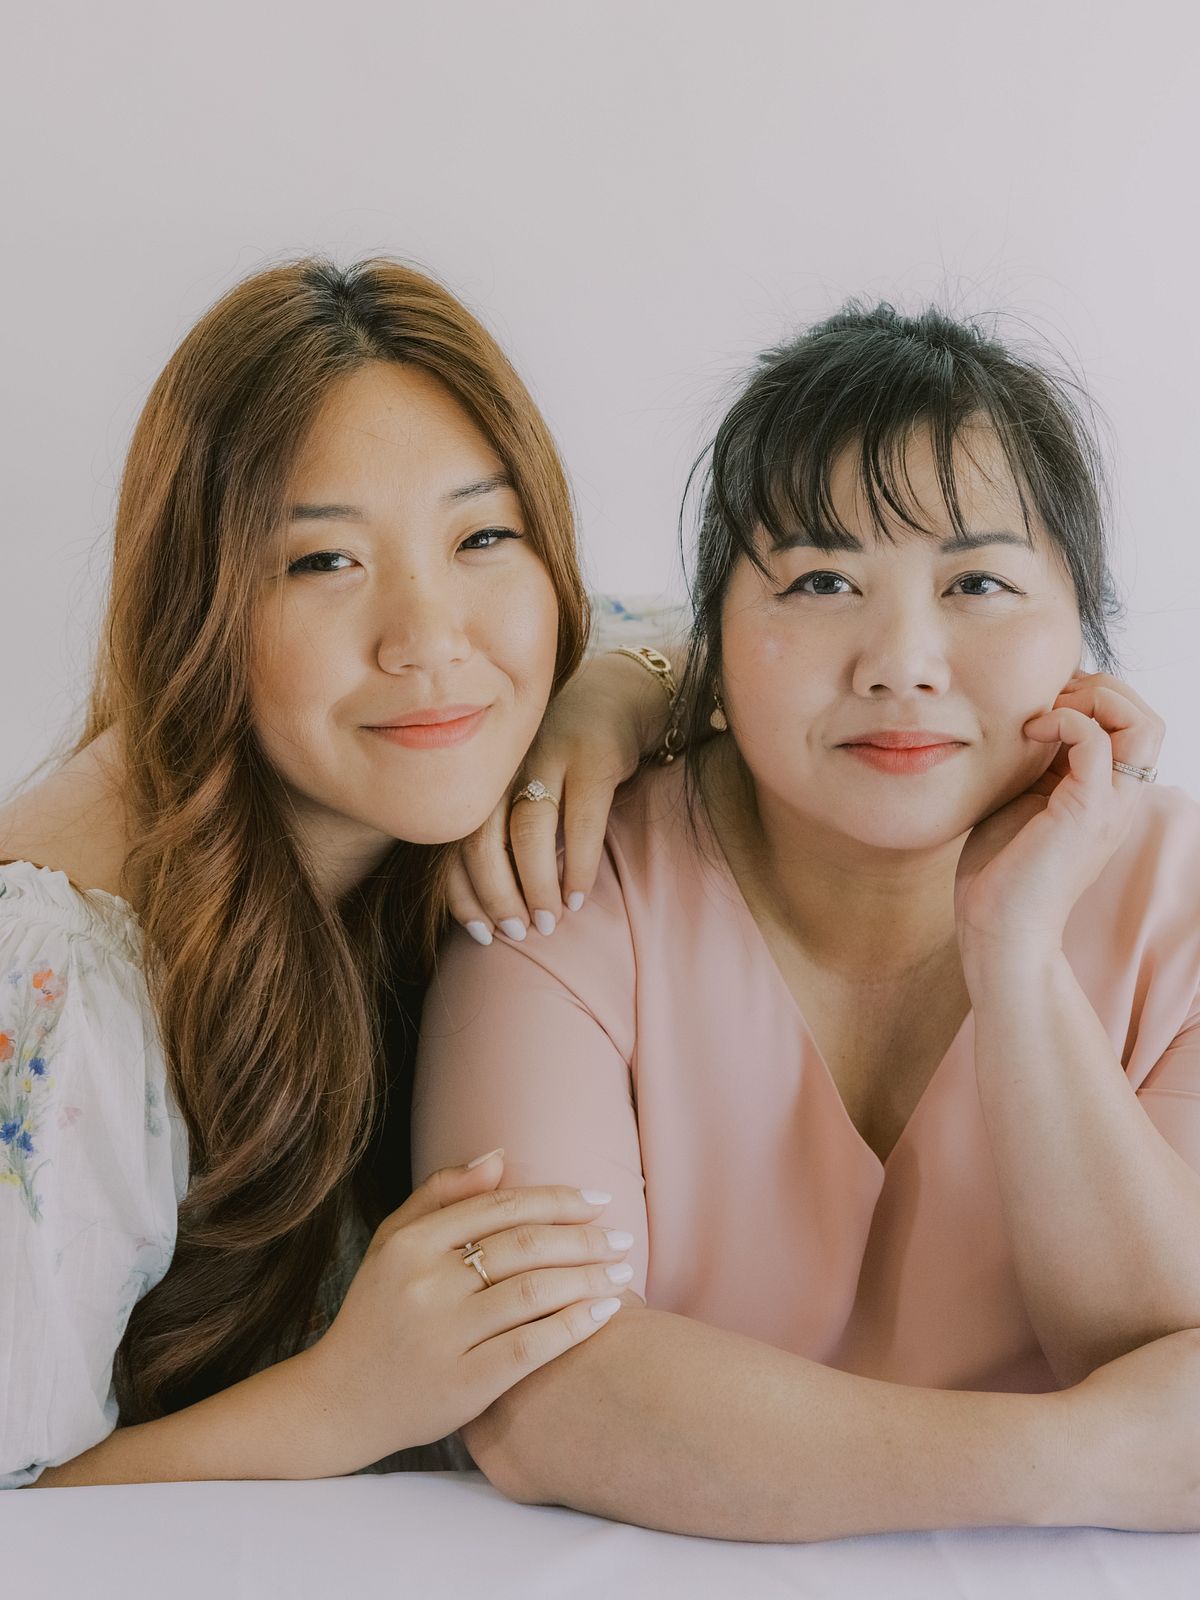 Seattle Brand Photography for Paper Talk Podcast of Quynh and Sara